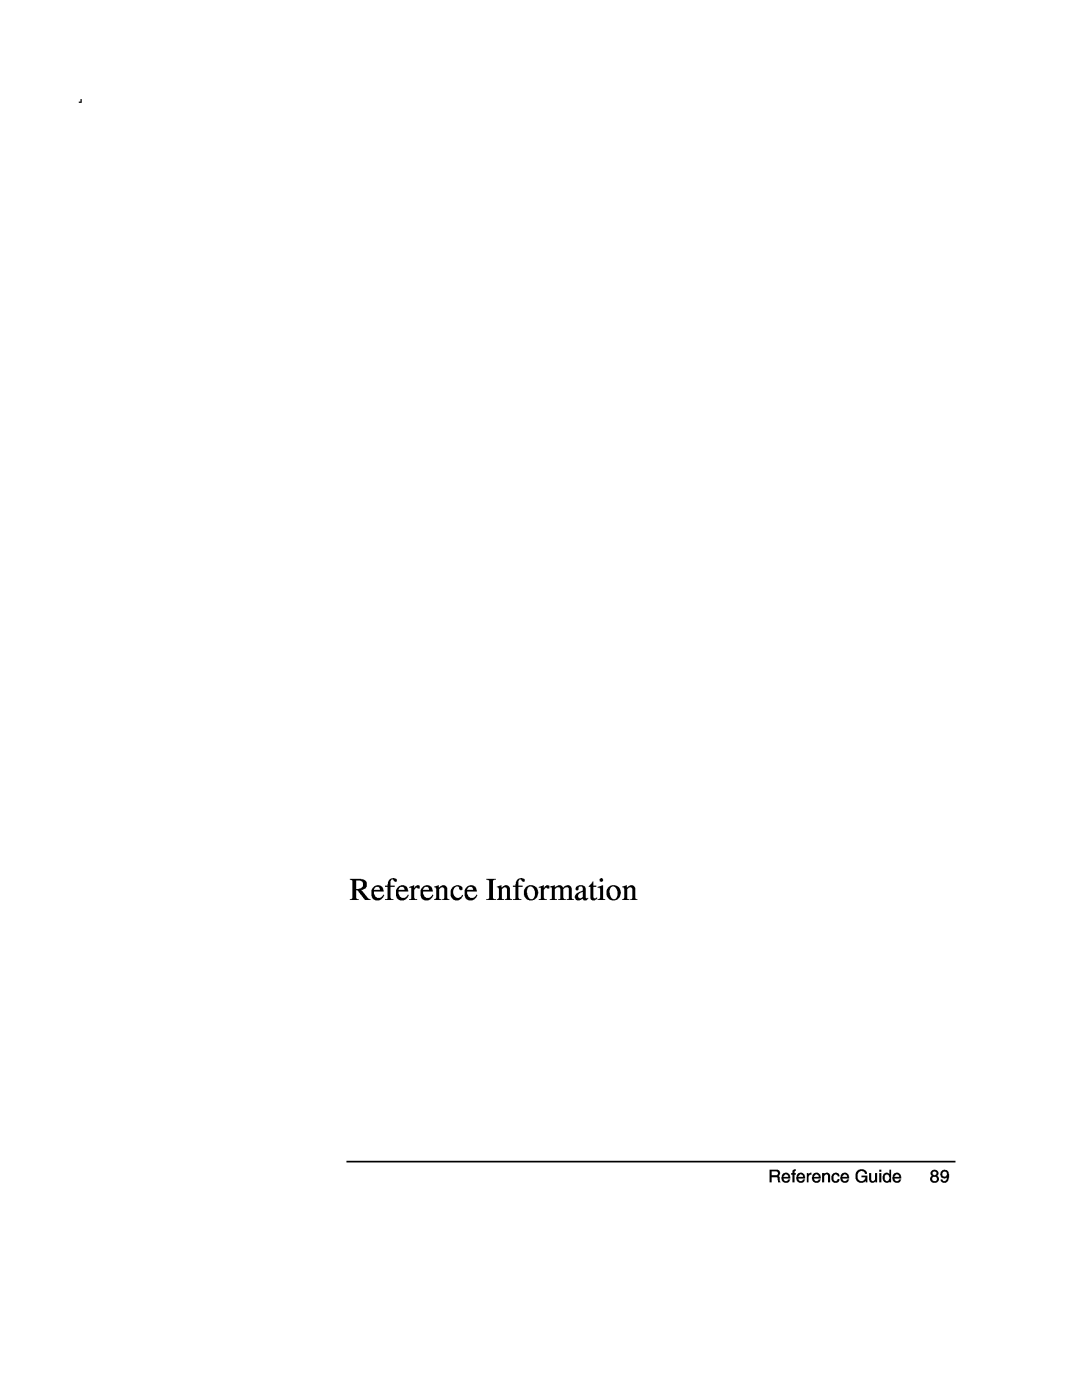 Compaq AMC20493-KT5 manual Reference Information, Reference Guide 